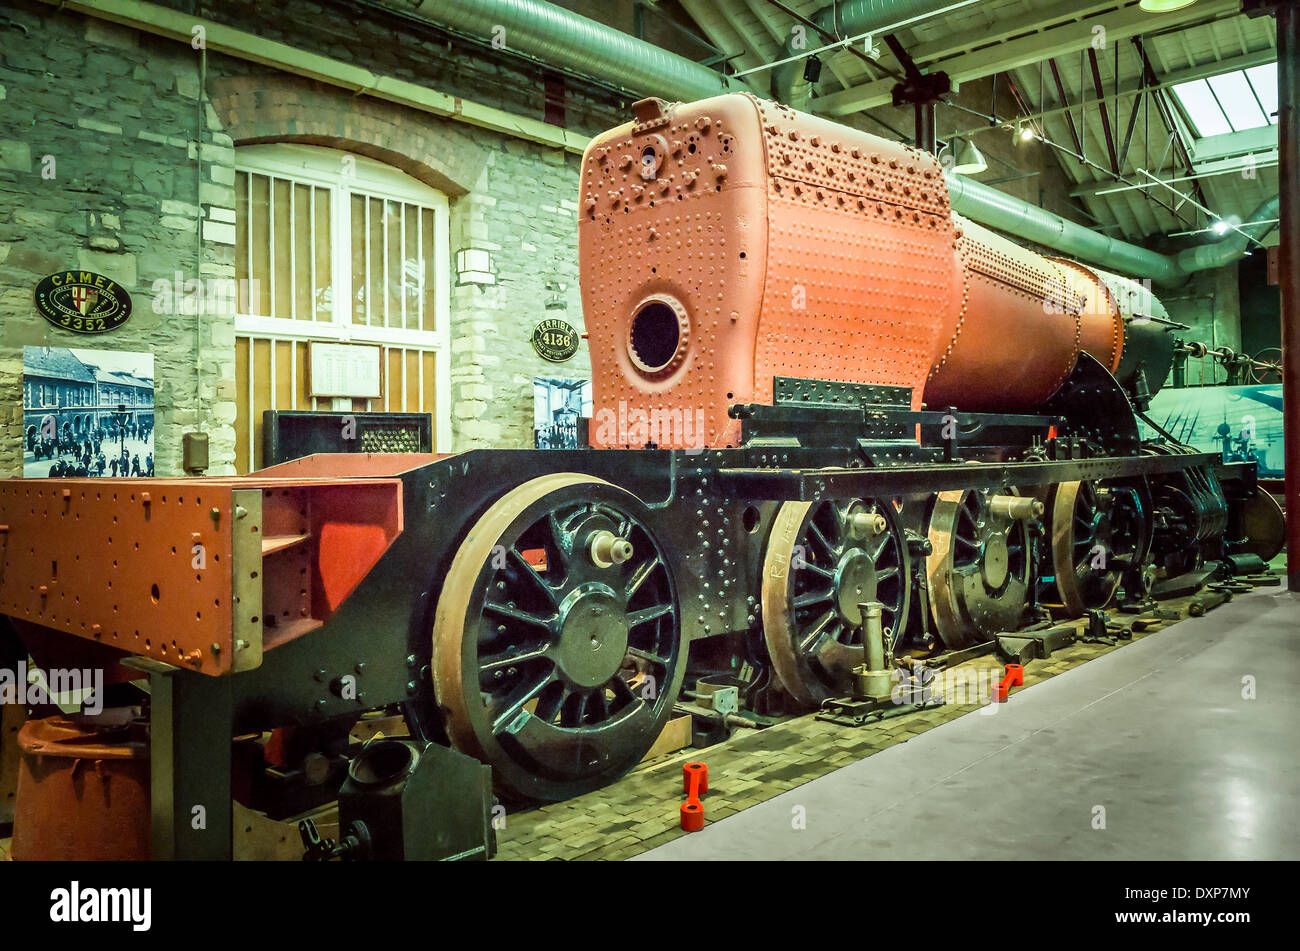 Inside the Boiler Shop section of STEAM museum of GWR engineering history in UK Stock Photo